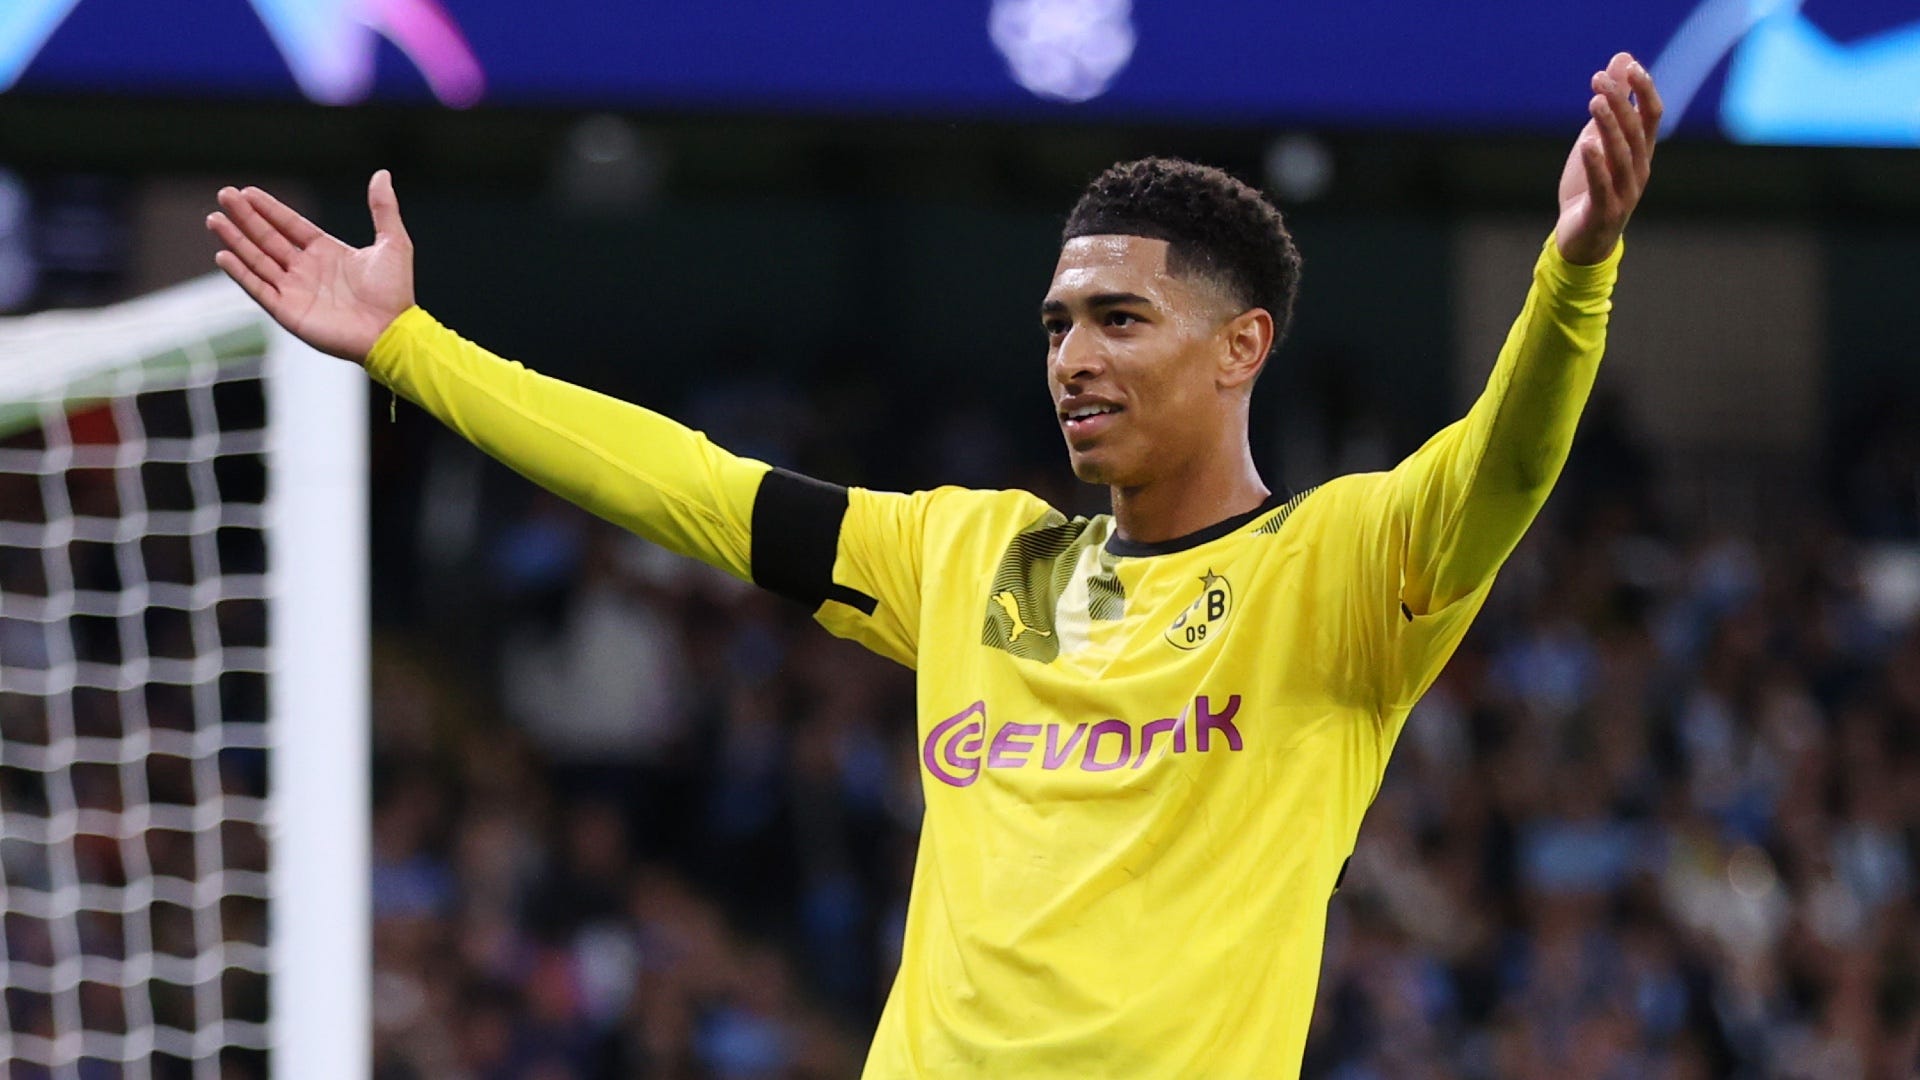 Hannover 96 vs Borussia Dortmund Live stream, TV channel, kick-off time and how to watch Goal US